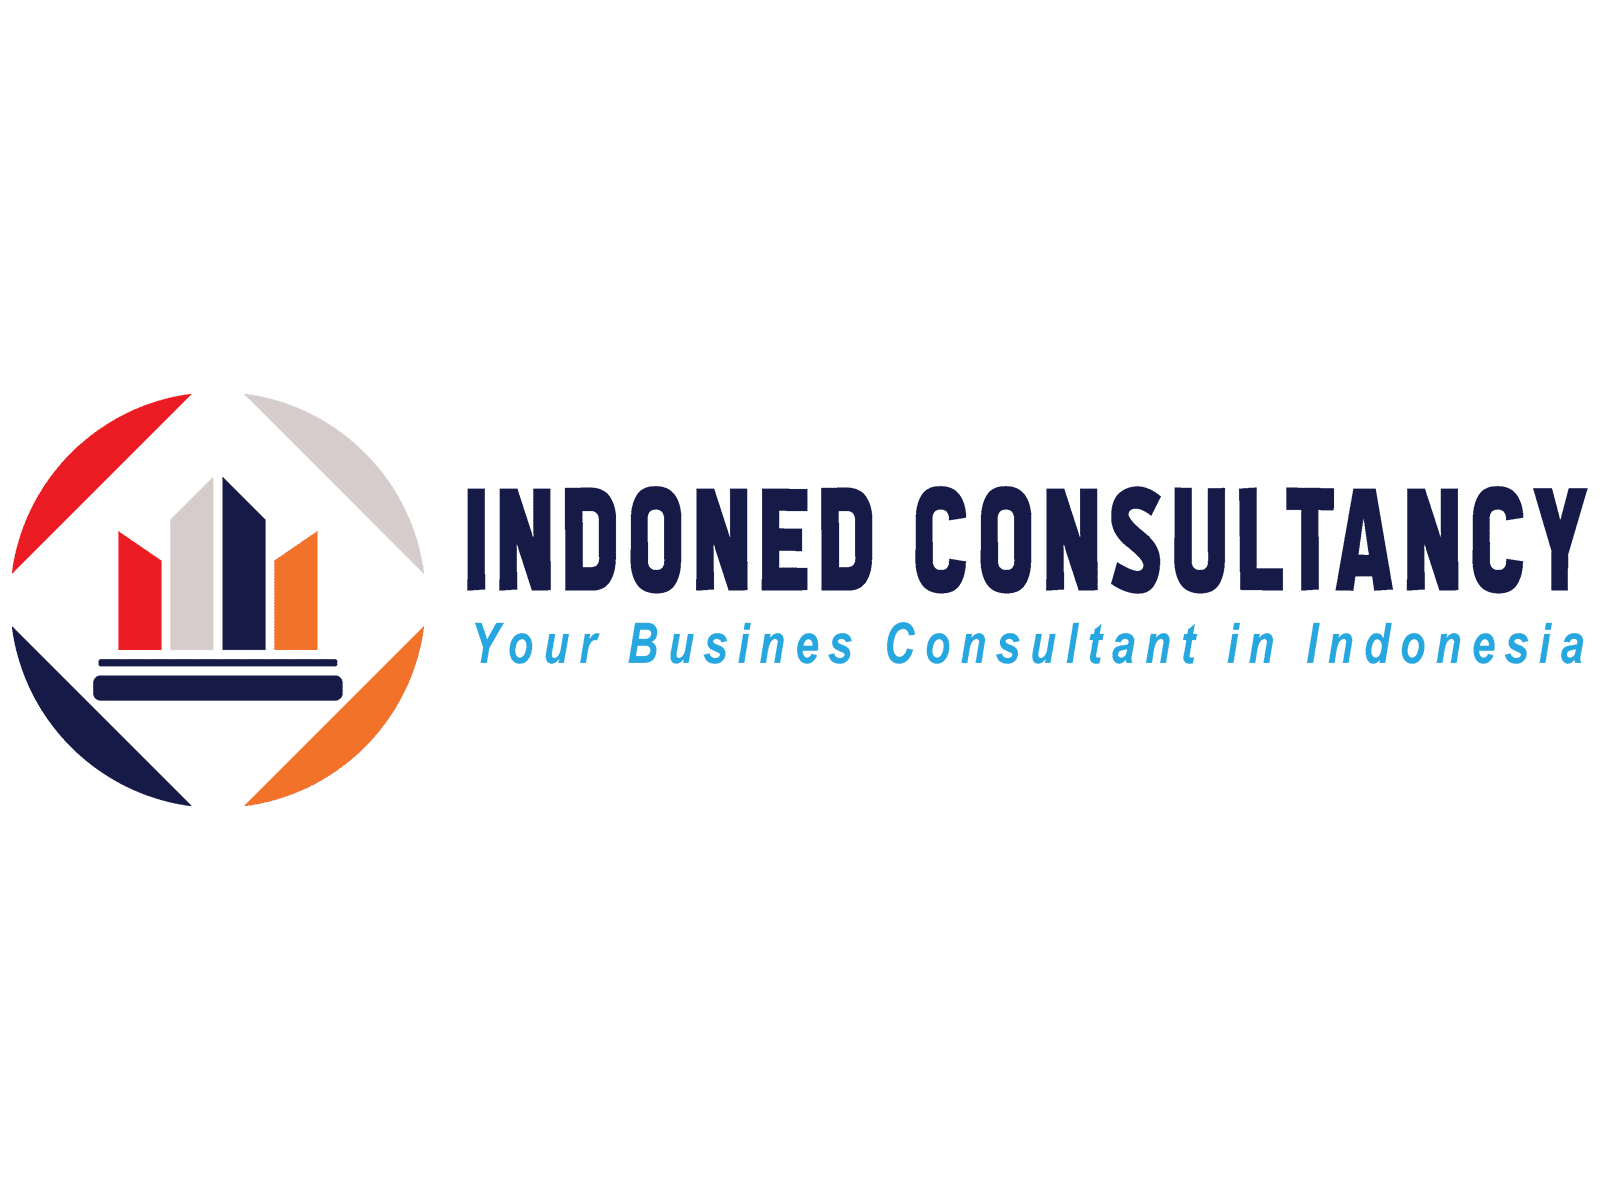 Indoned Consultancy